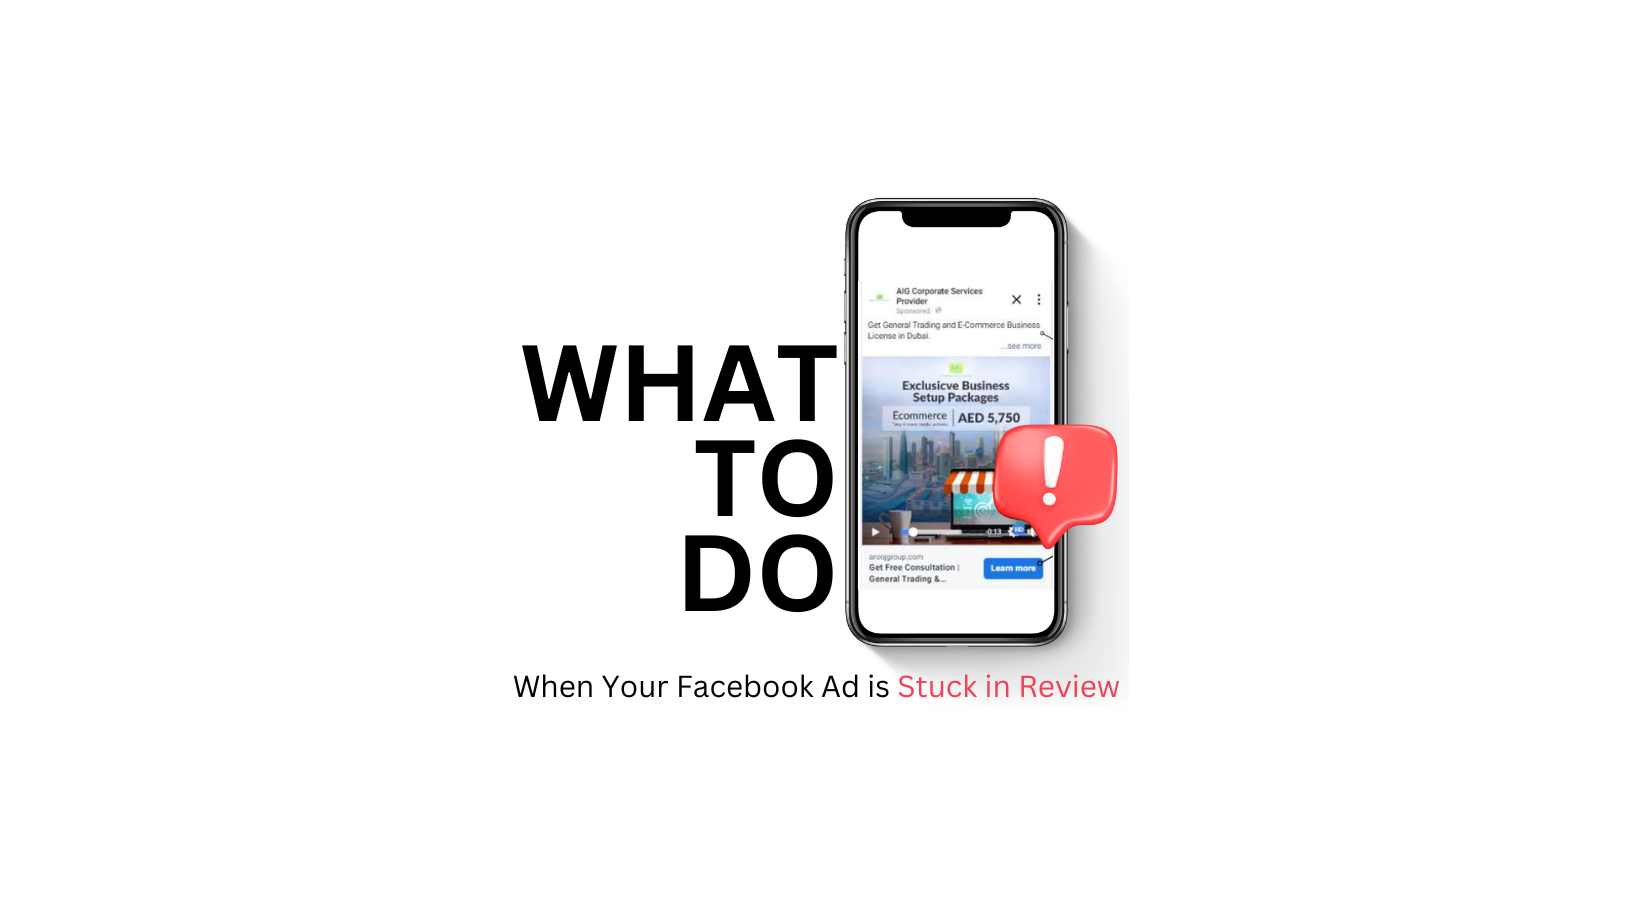 What to Do When Your Facebook Ad is Stuck in Review